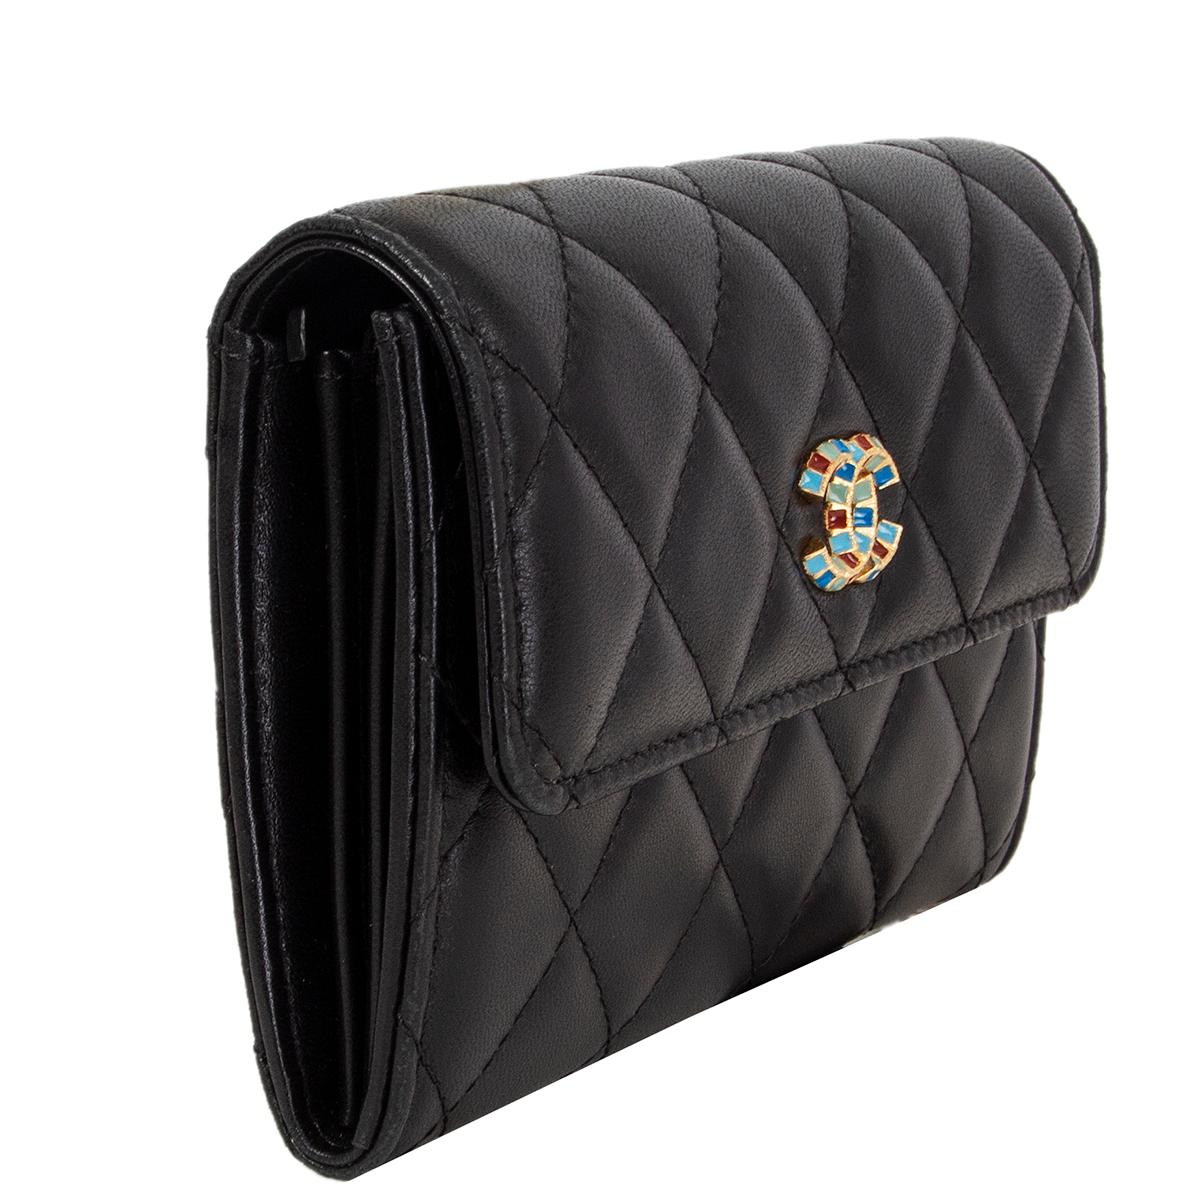 Chanel quilted wallet in black lambskin with multicolor 'CC' push button closure. Lined in black lambskin and nylon with a zipper coin pocket in the middle and three credit card slots against the front and back. Slit pocket against the back. Has